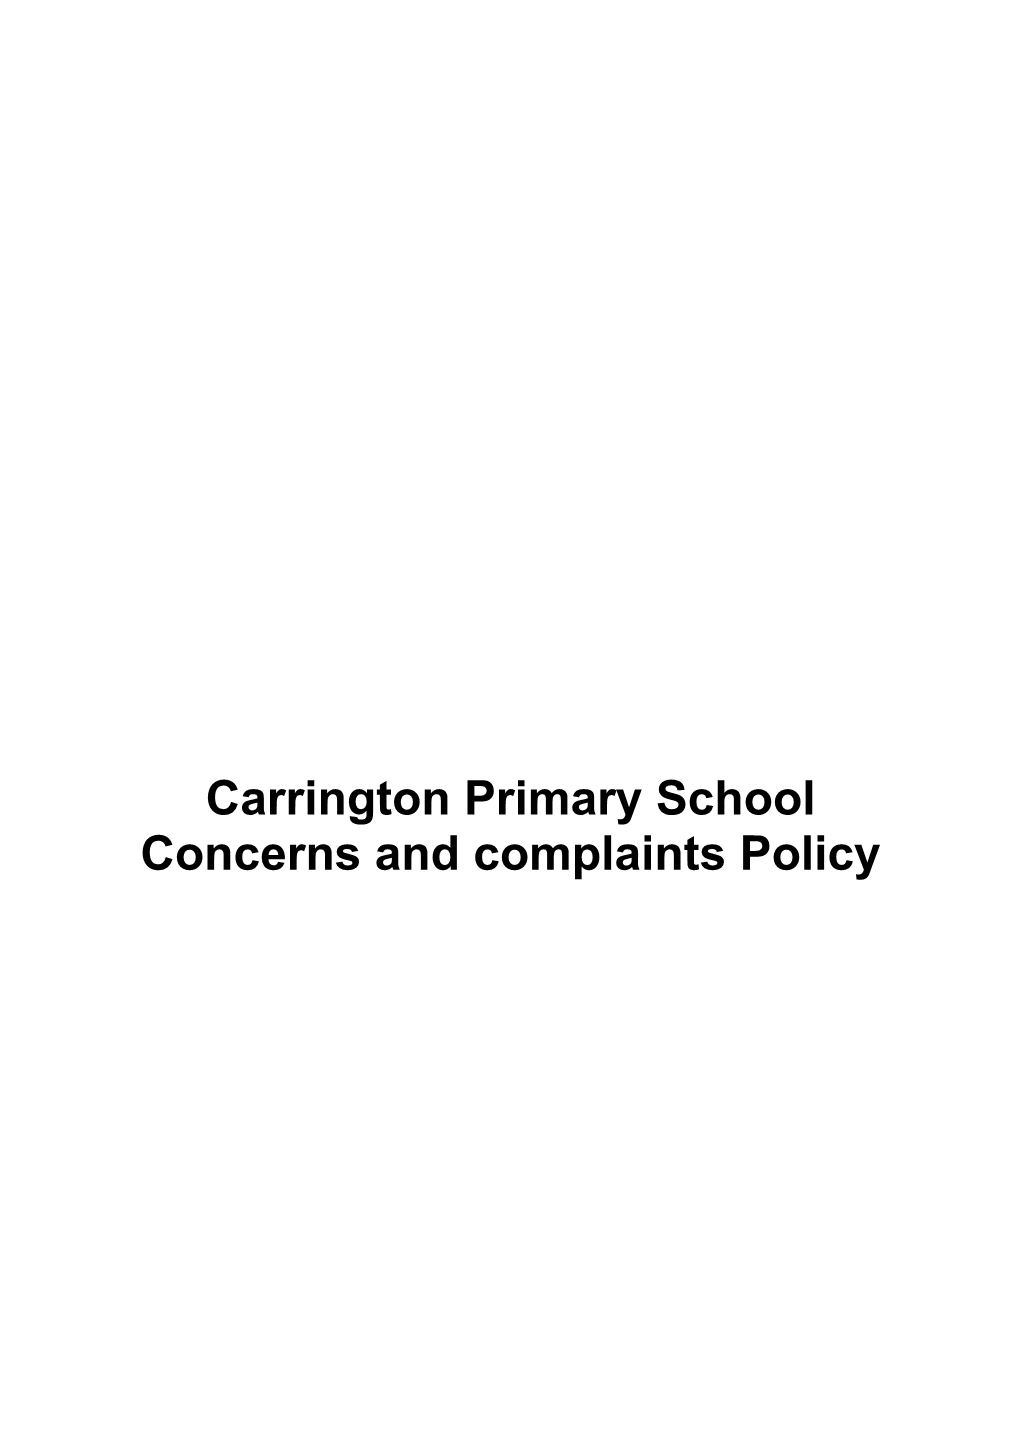 Concerns and Complaints Policy